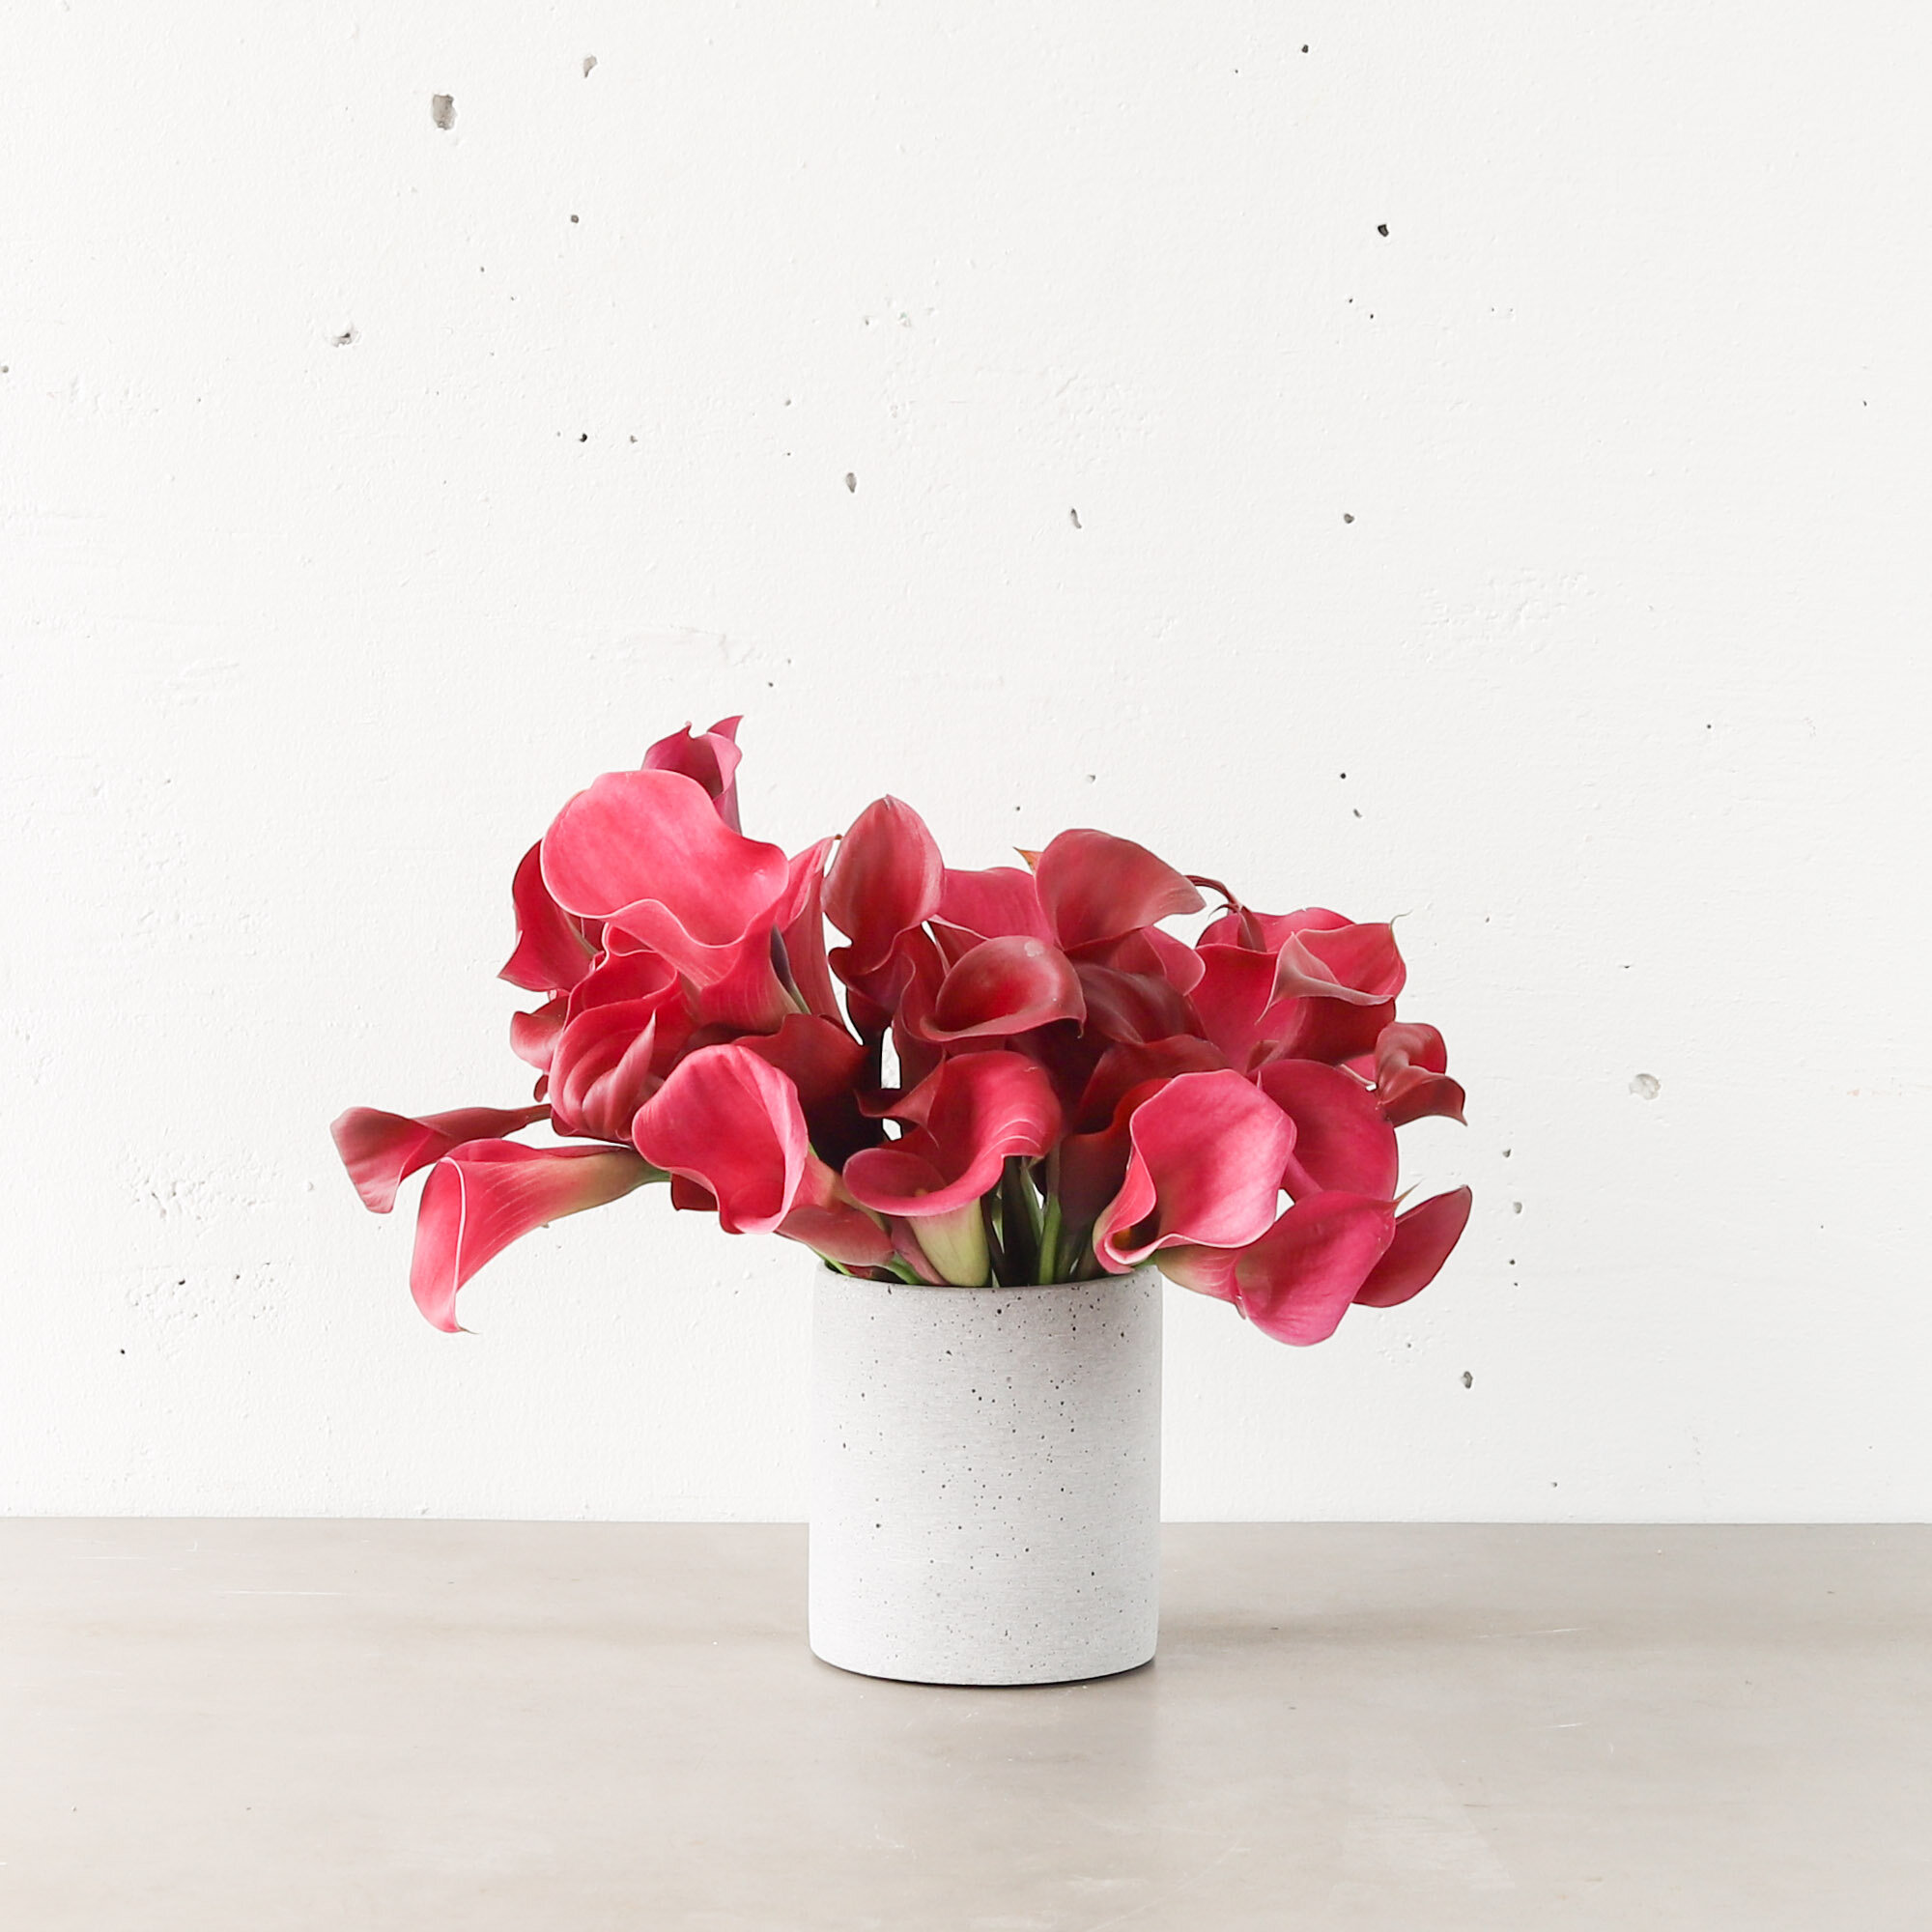 A bouquet of pink calla lilies in a white vase on a table top